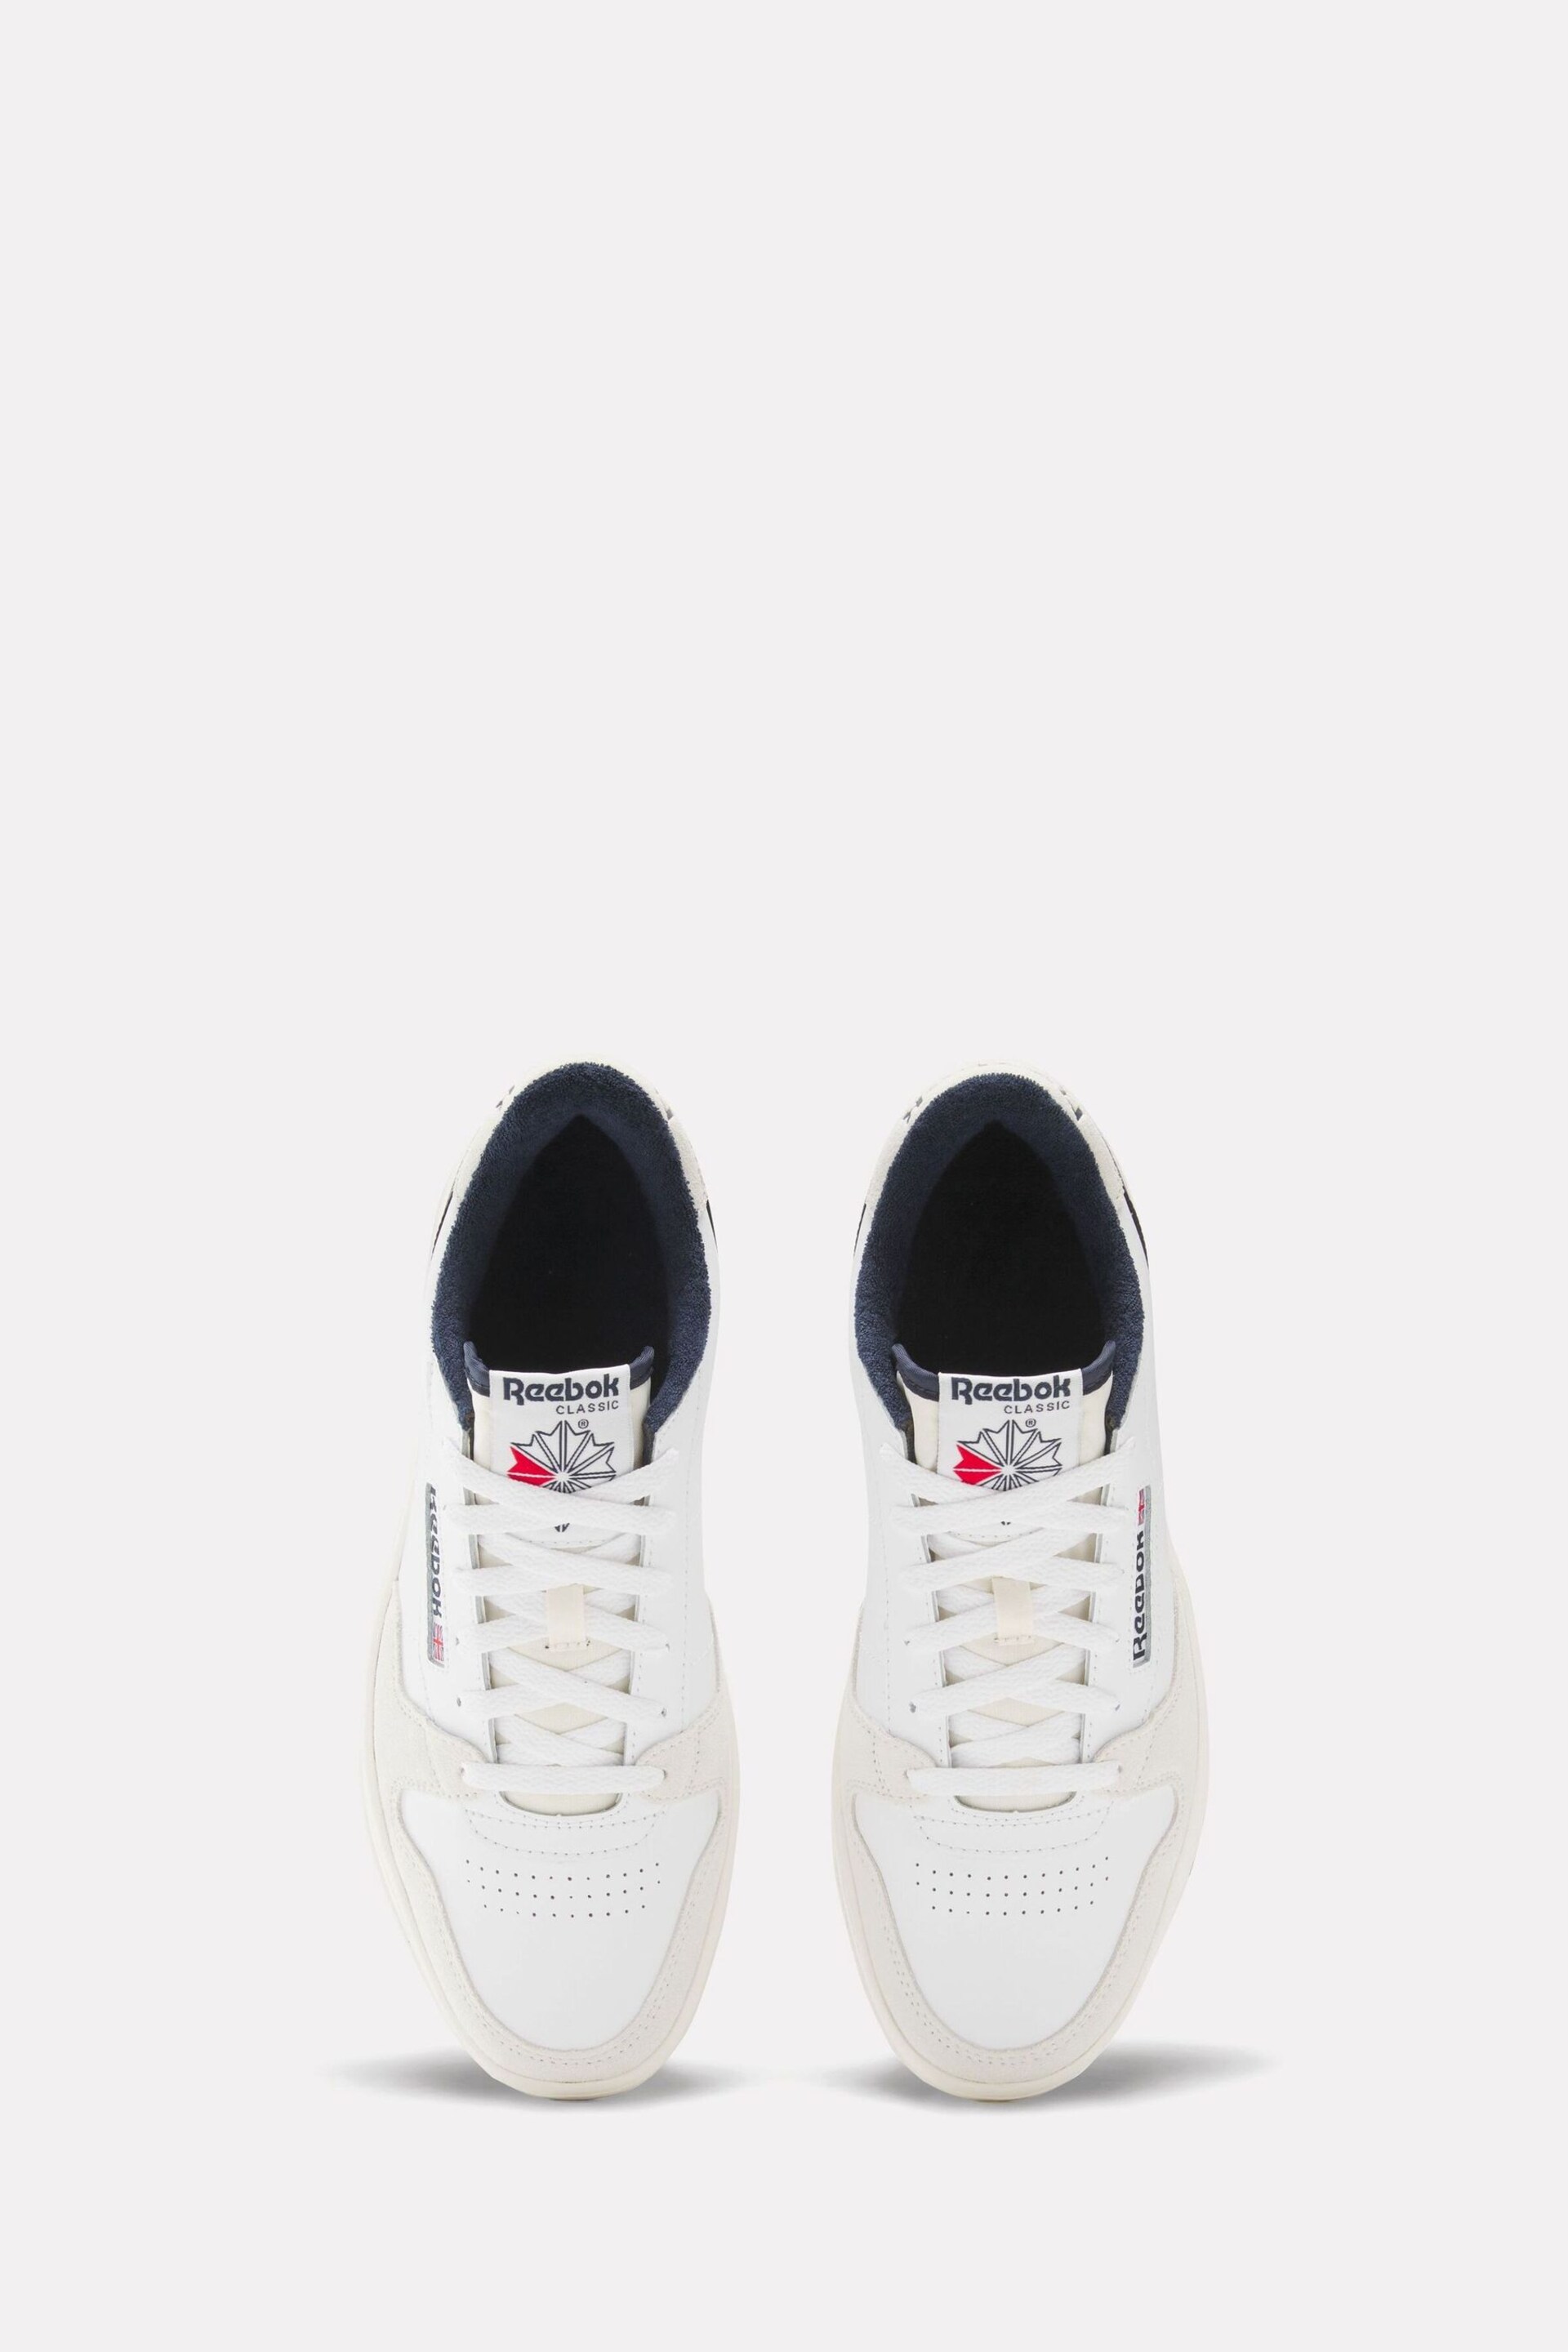 Reebok Mens Phase Court Trainers - Image 4 of 6